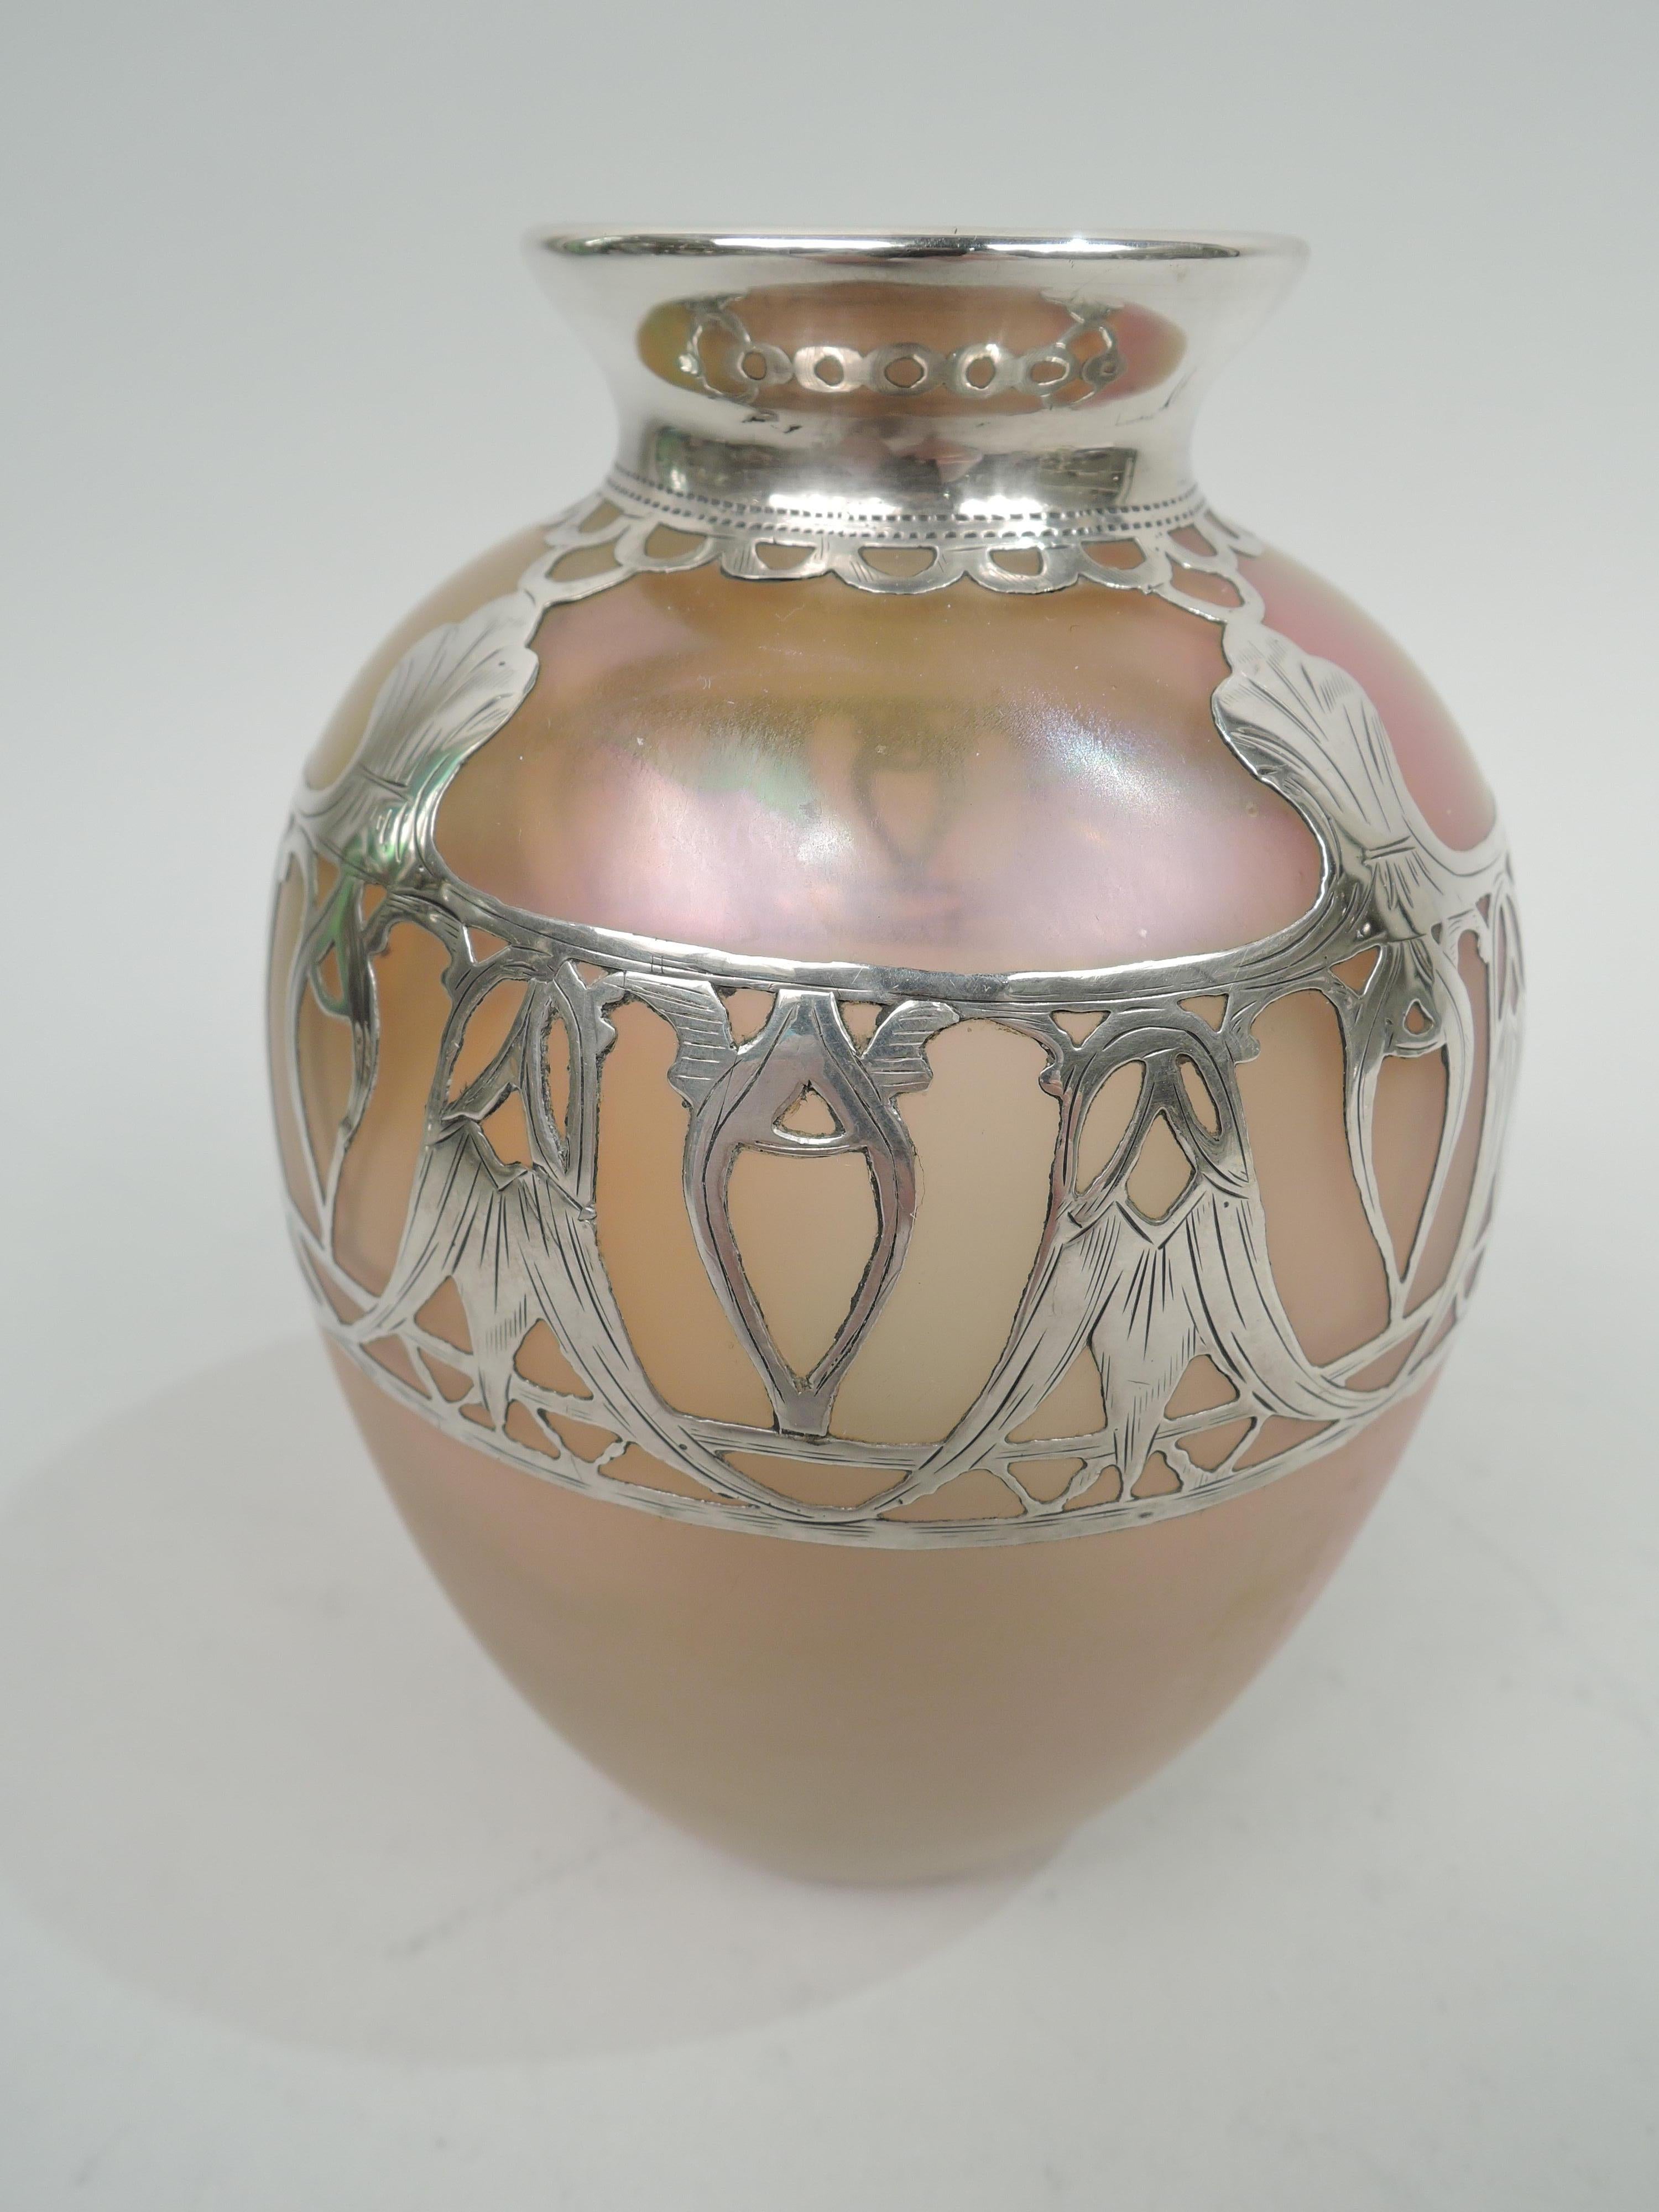 Turn-of-the-century Silberiris glass vase by Loetz with engraved silver overlay. Ovoid with flared rim in silver collar. Overlay in form of open and stylized leaf band and c-scroll neck border. Glass iridescent in orange, pink, and green.